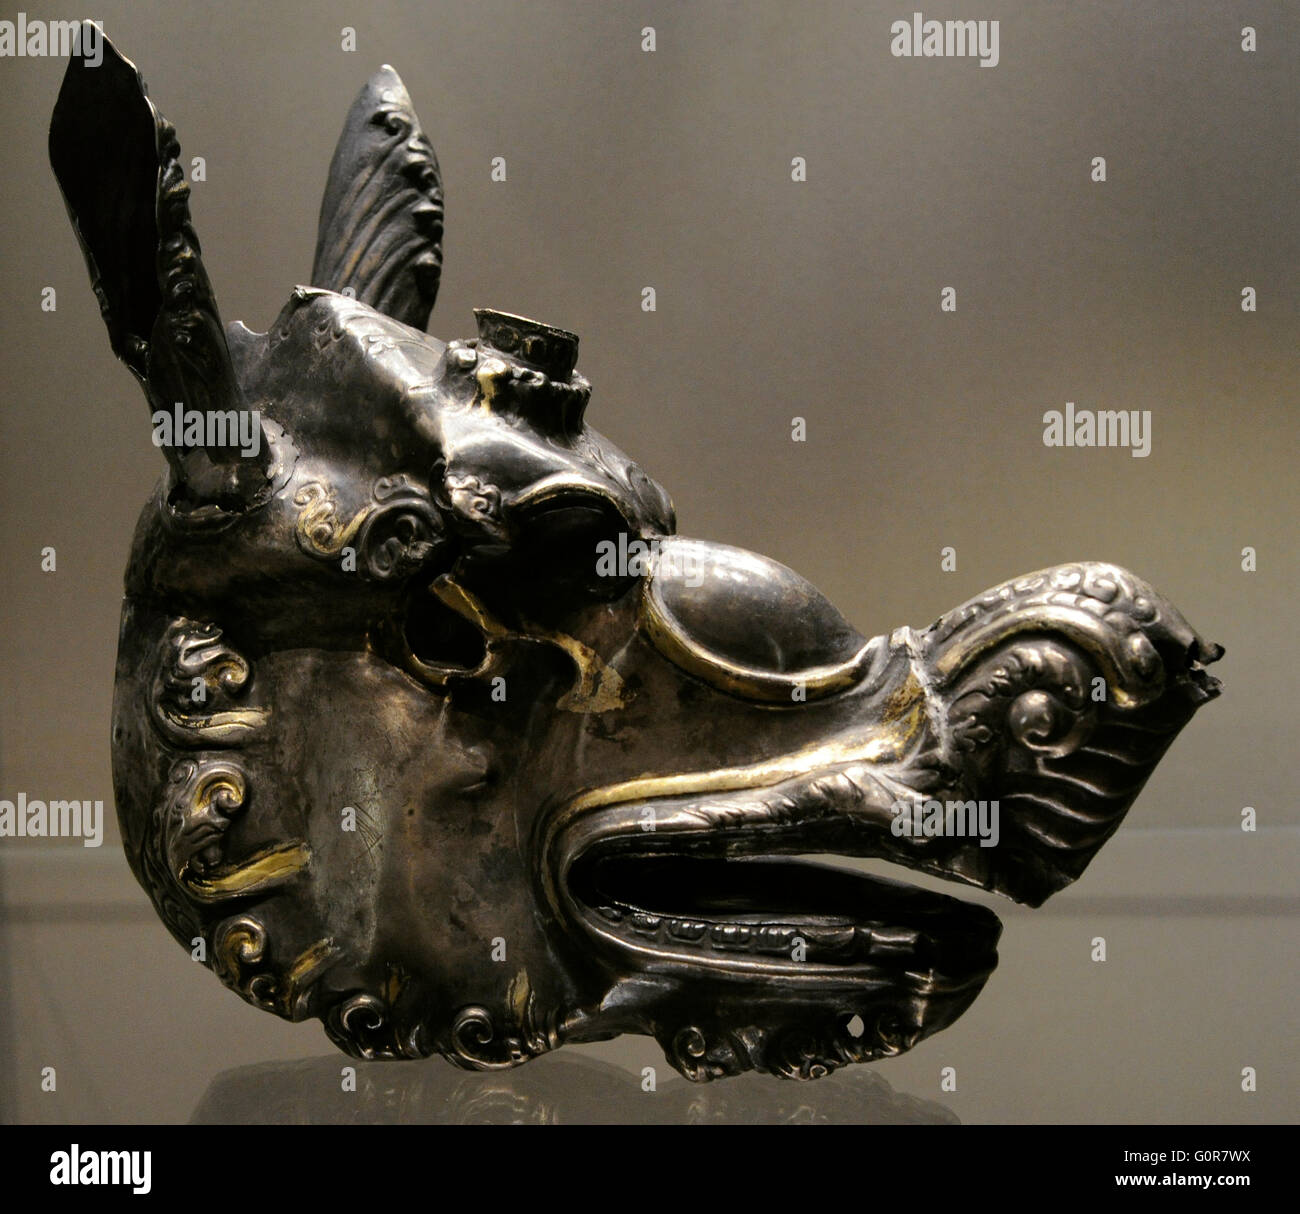 Sasanian Empire. Finial in the shape of a Simurgh's Head. Silver; chasing, gilding. Iran (?). 6th-7th centuries. The State Hermitage Museum. Saint Petersburg. Russia. Stock Photo